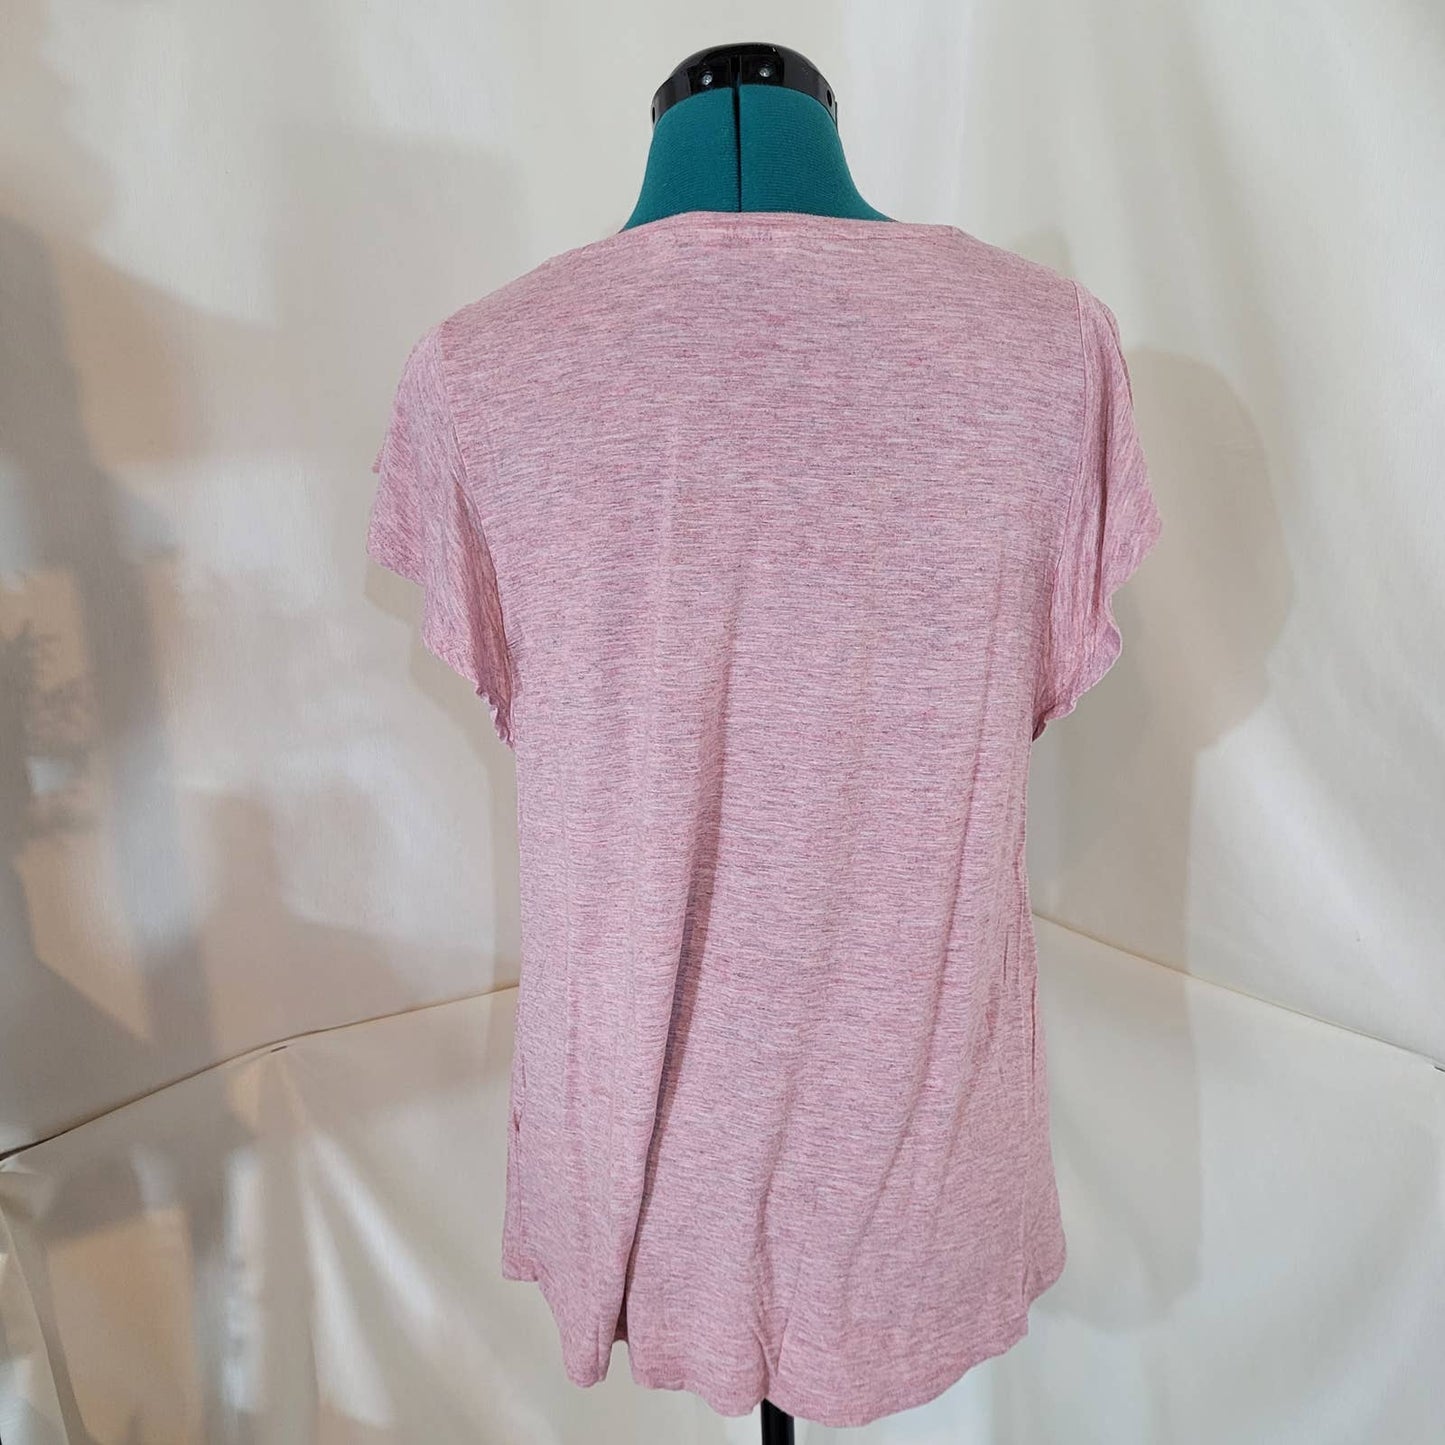 Reitmans Pink Heathered T-Shirt with Ruffled Sleeves - Size Small